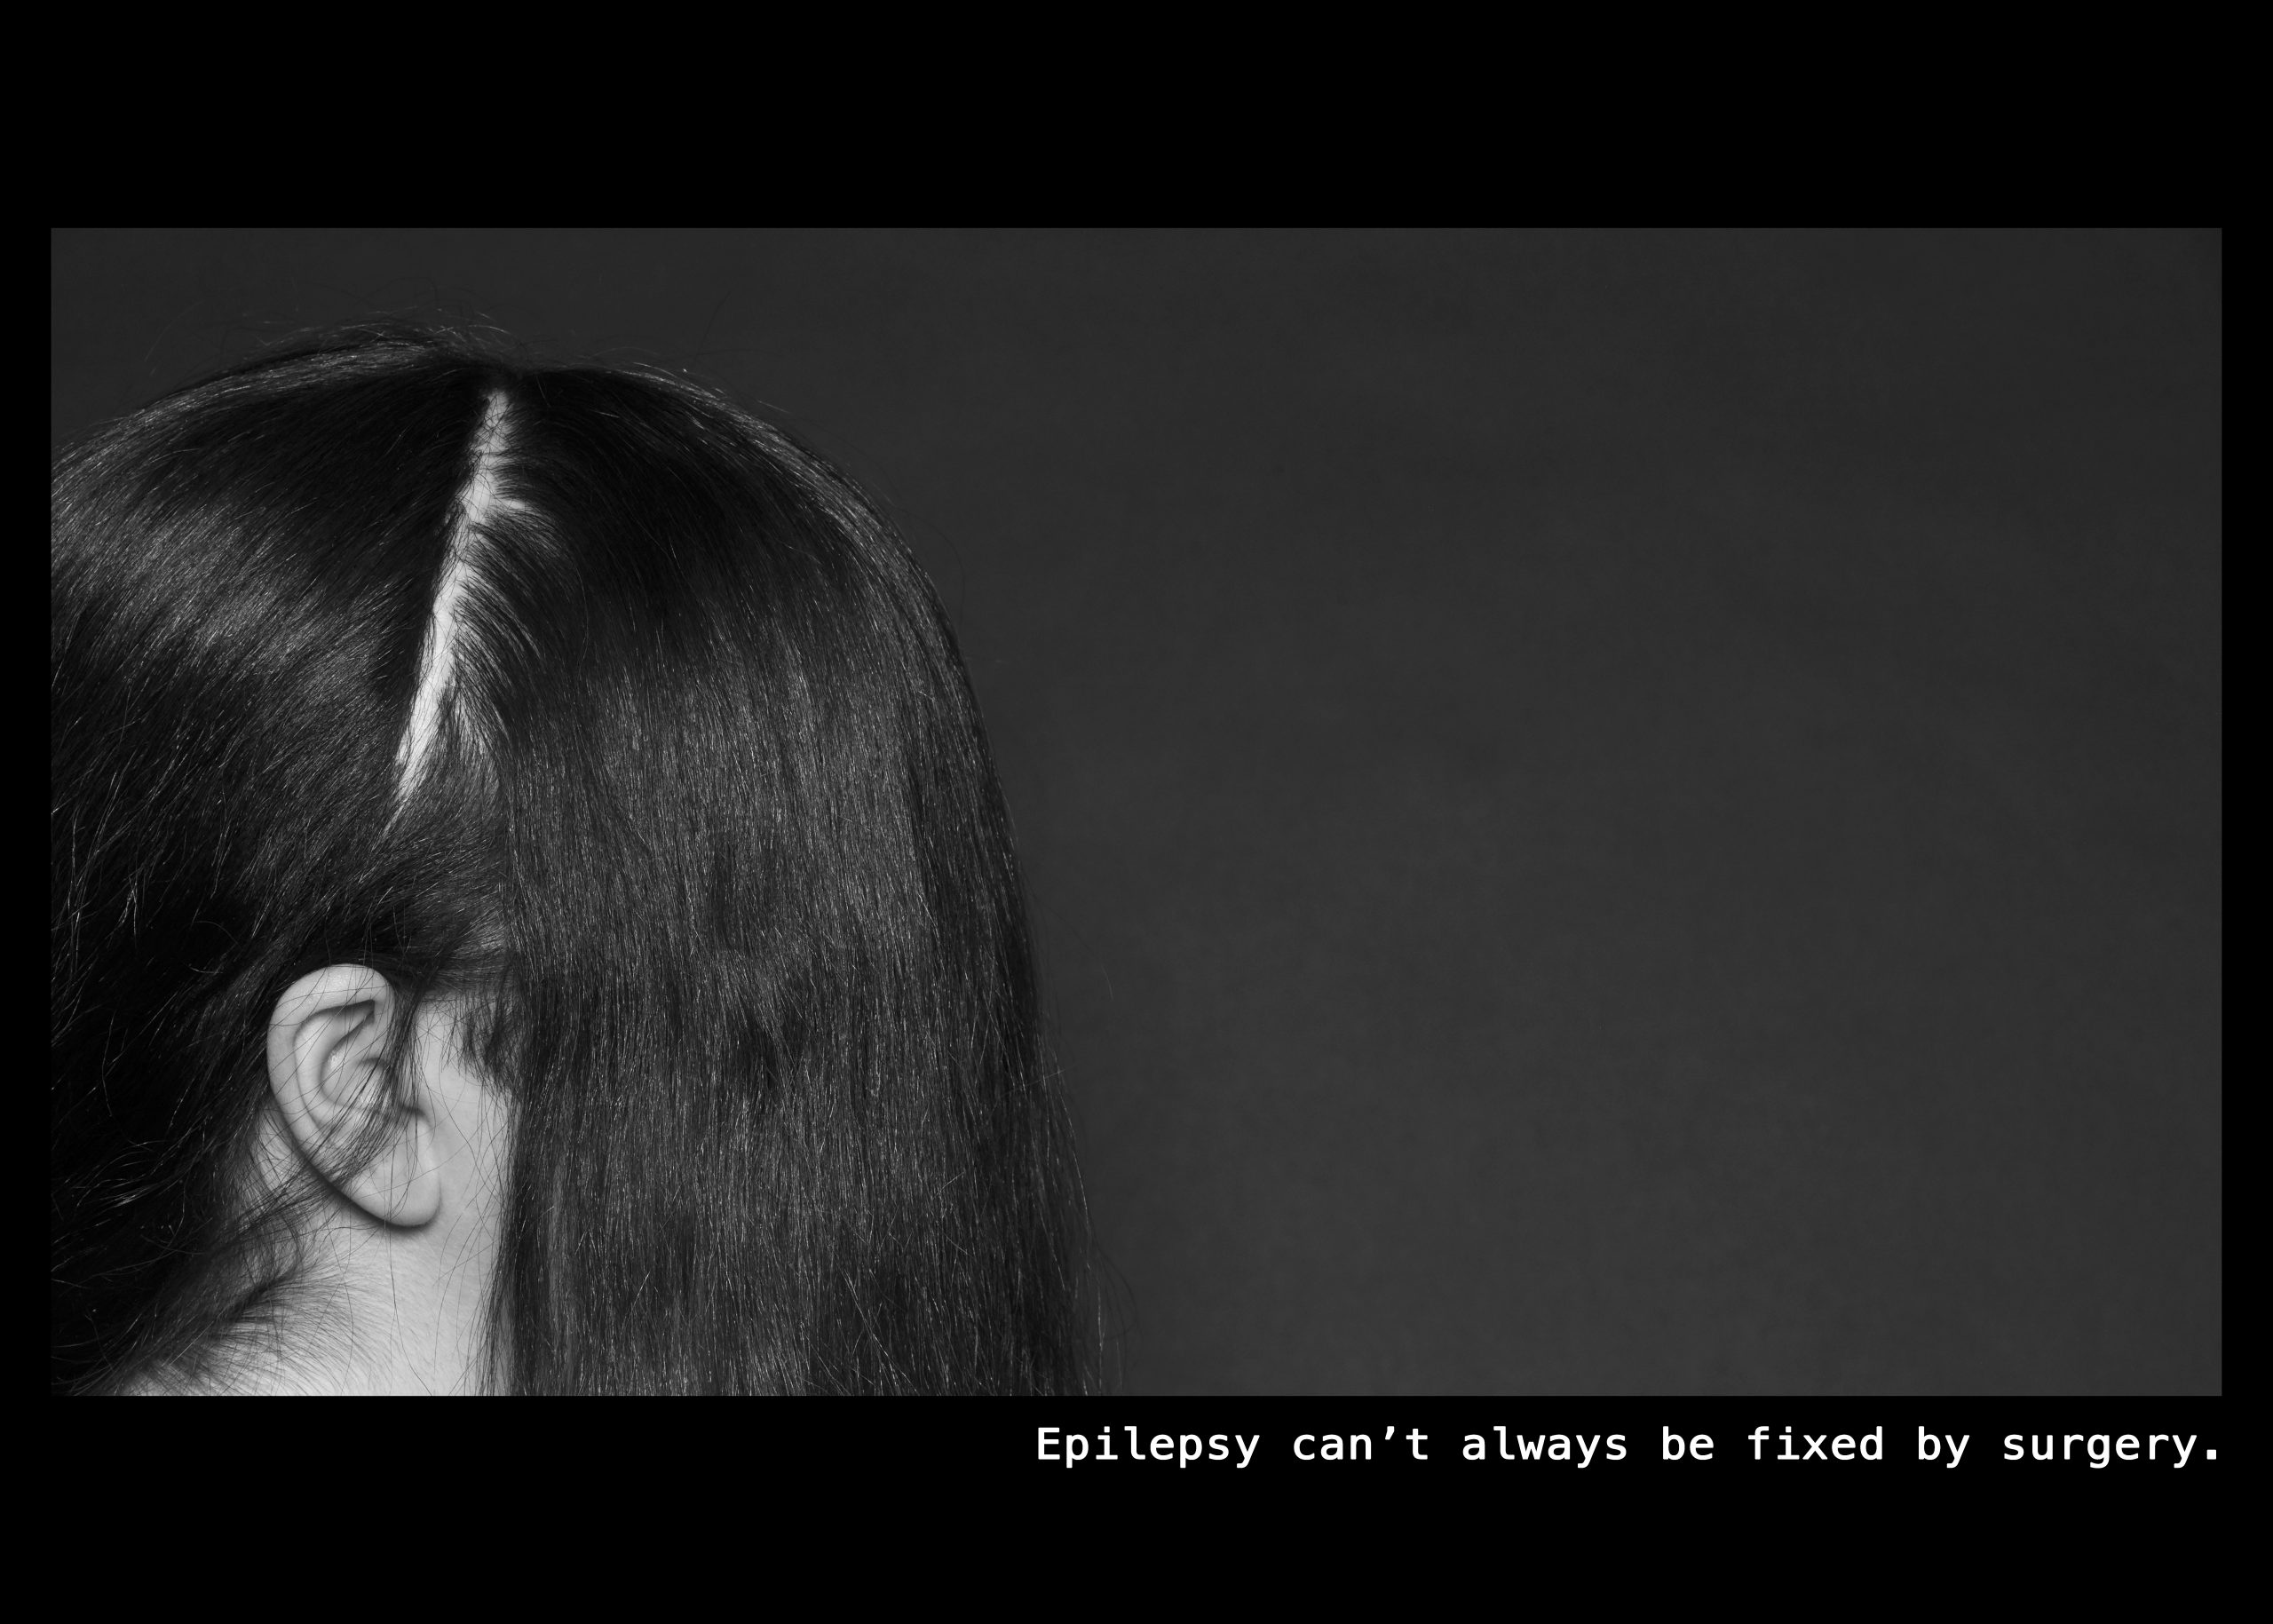 Image of a woman and the profile of her face. Her hair is parted exposing part of her skull. Text: Epilepsy can't always be fixed by surgery.